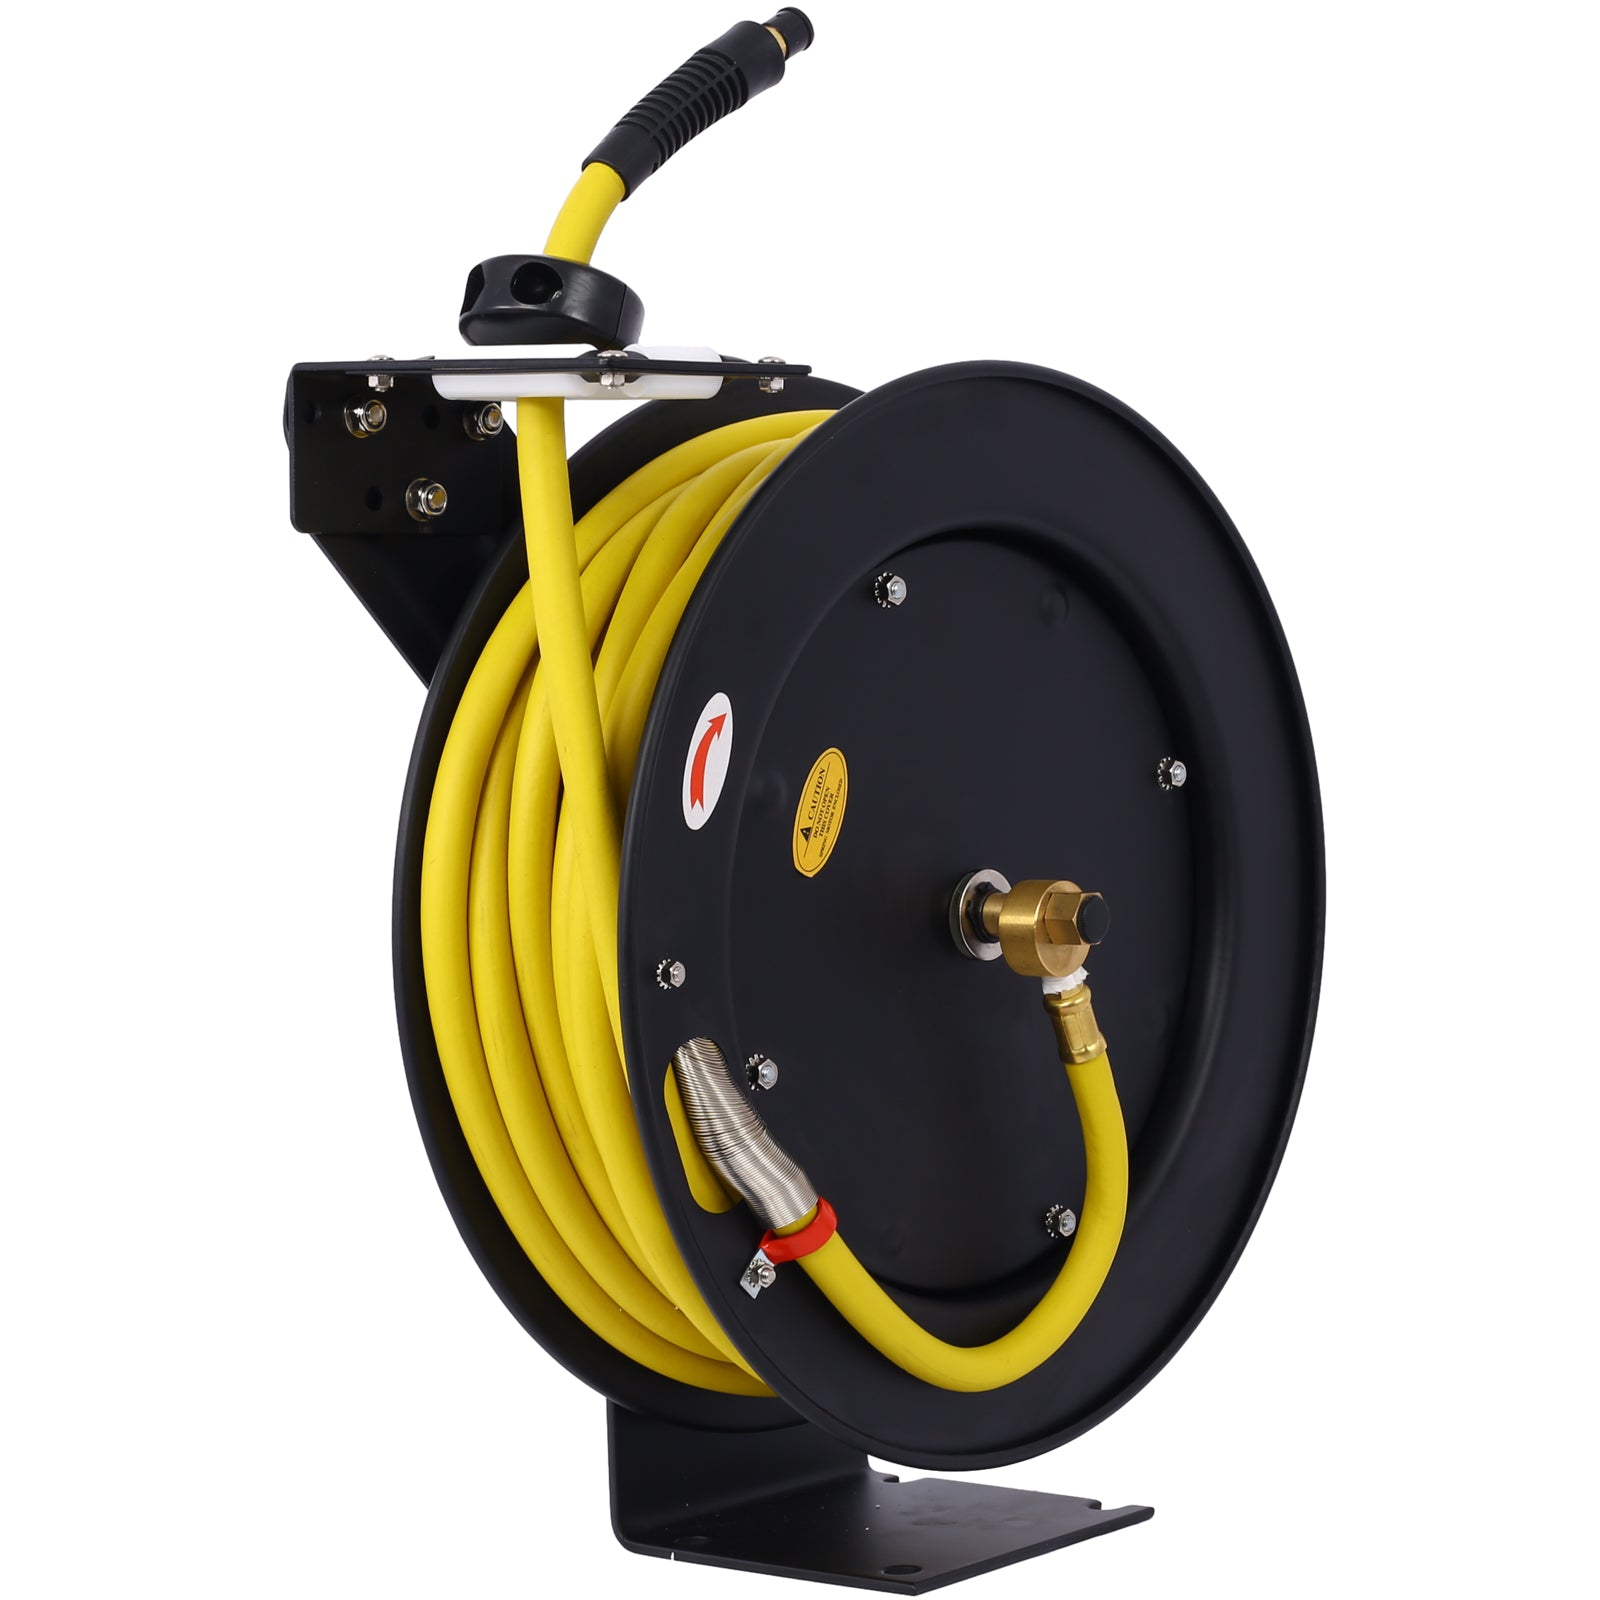 Introducing high-pressure hose reels with stainless steel swivel for  hassle-free and flexible operations in the field